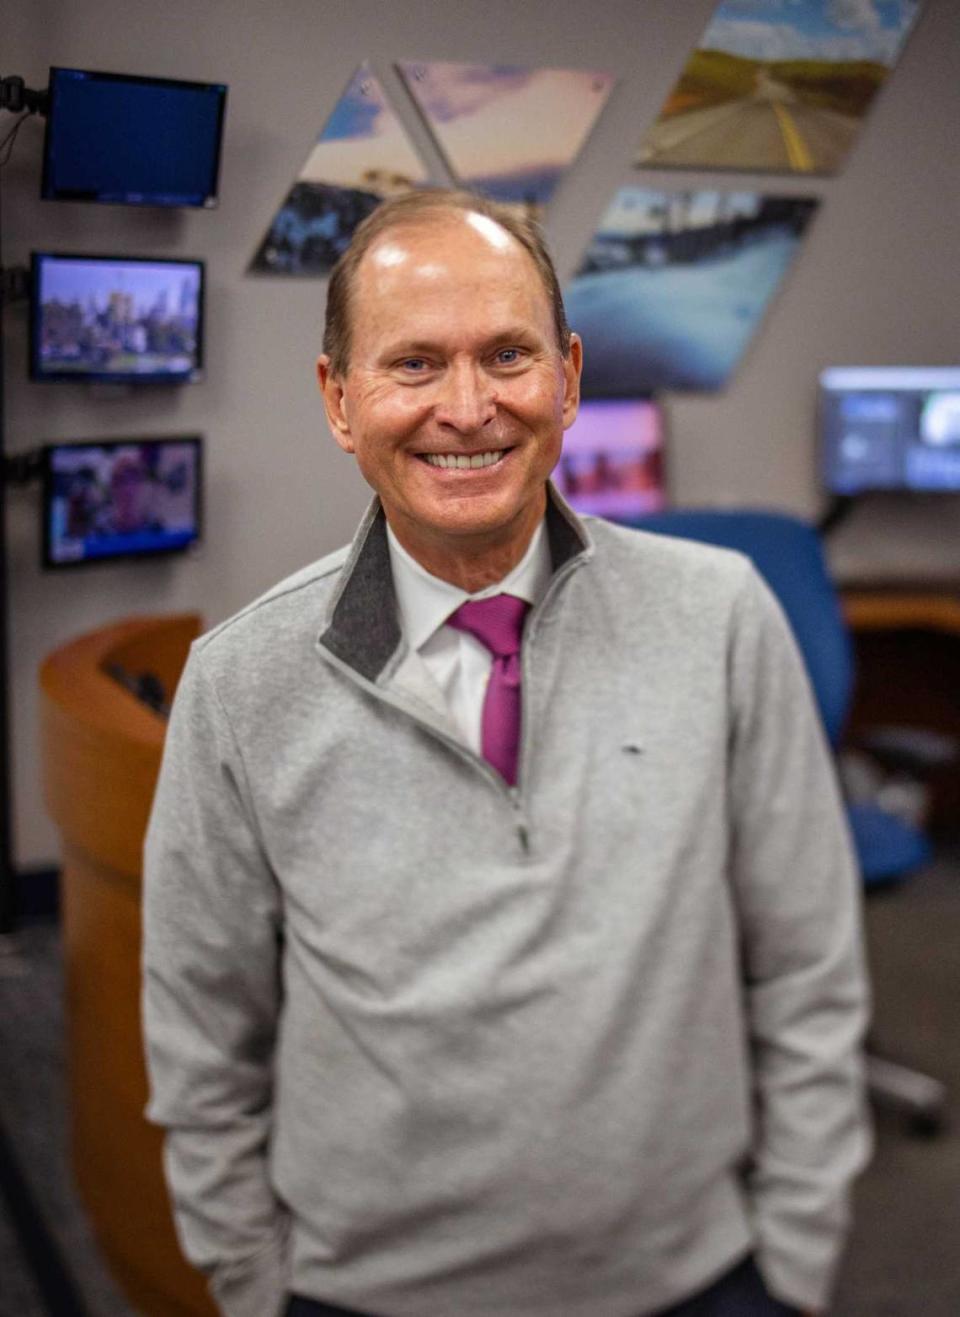 KCRA chief meteorologist Mark Finan stands in the KCRA weather center in November. On Friday evening, the broadcaster will give his final forecast on Channel 3. His new assignment: Travel, photography and, of course, the weather.